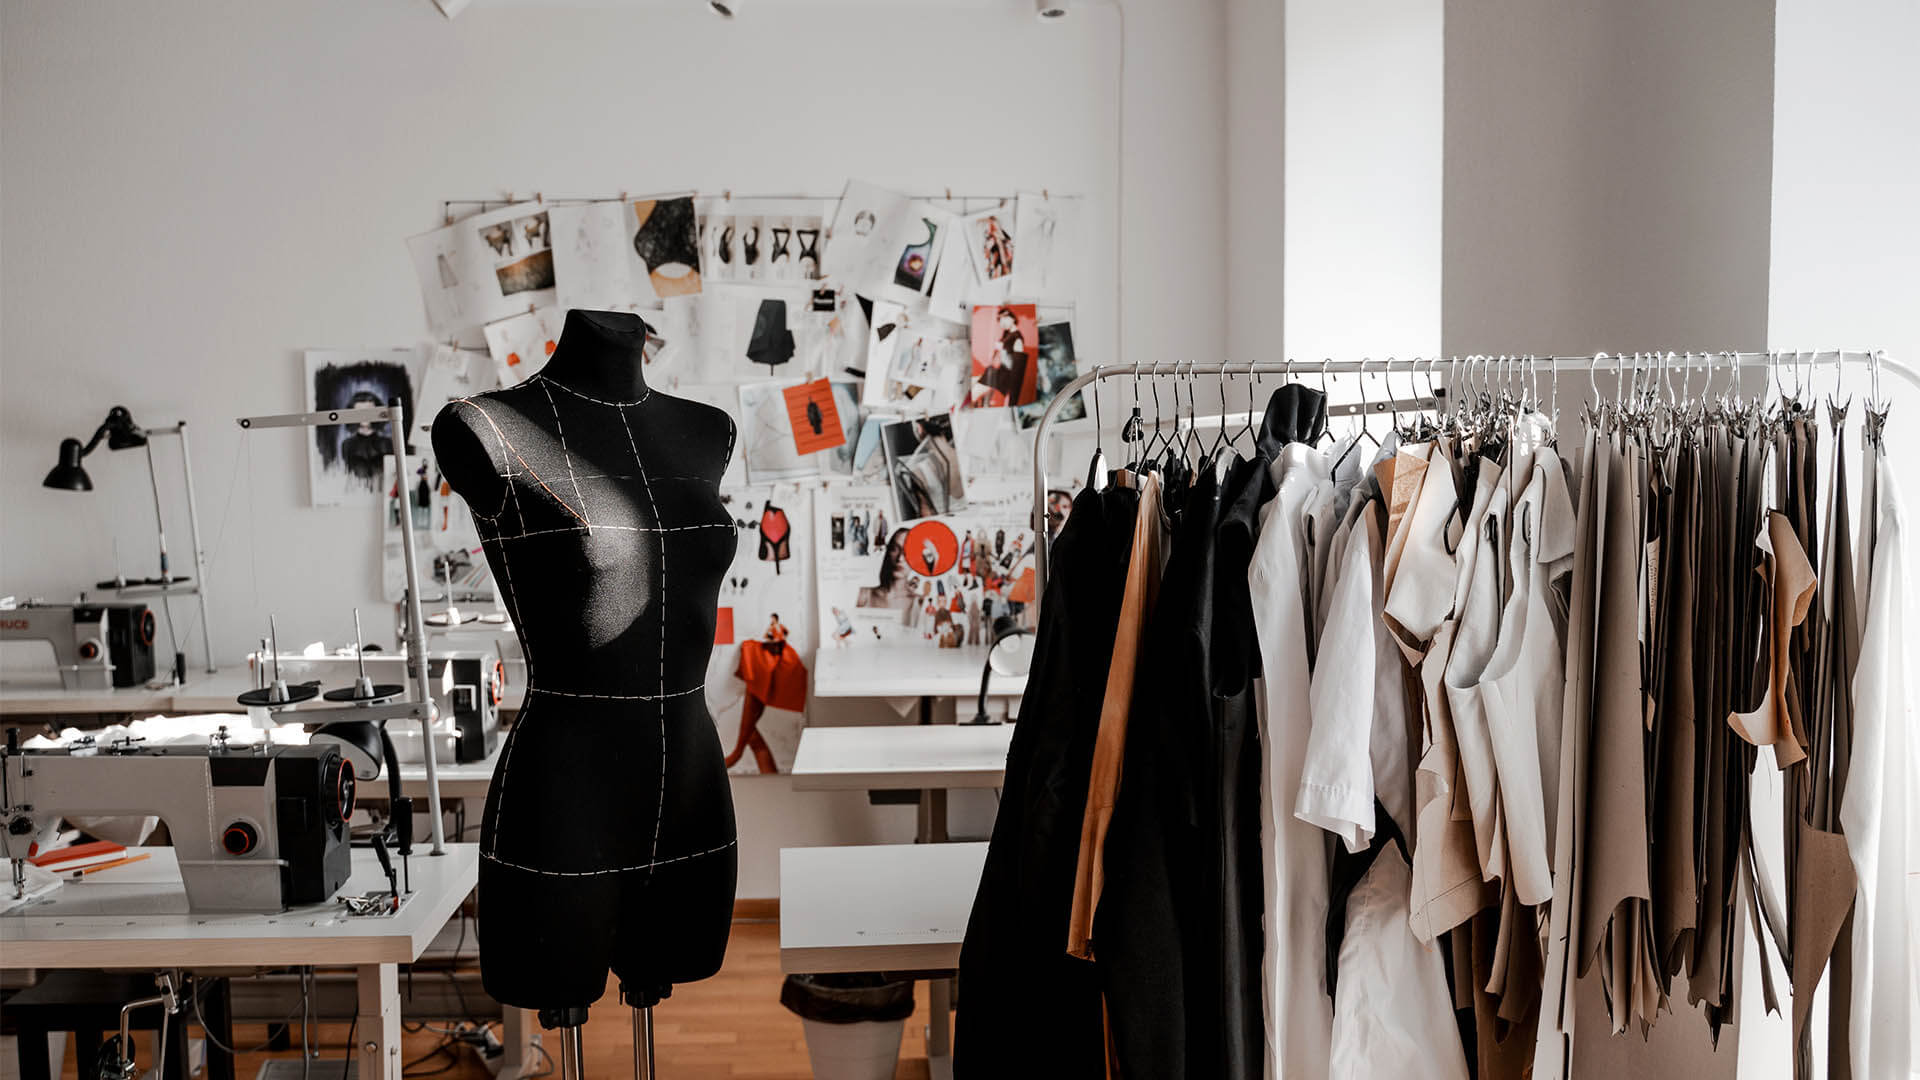 We're here to help fashion brands in any phase design and execute stylish and well-fitting clothing for all body types.